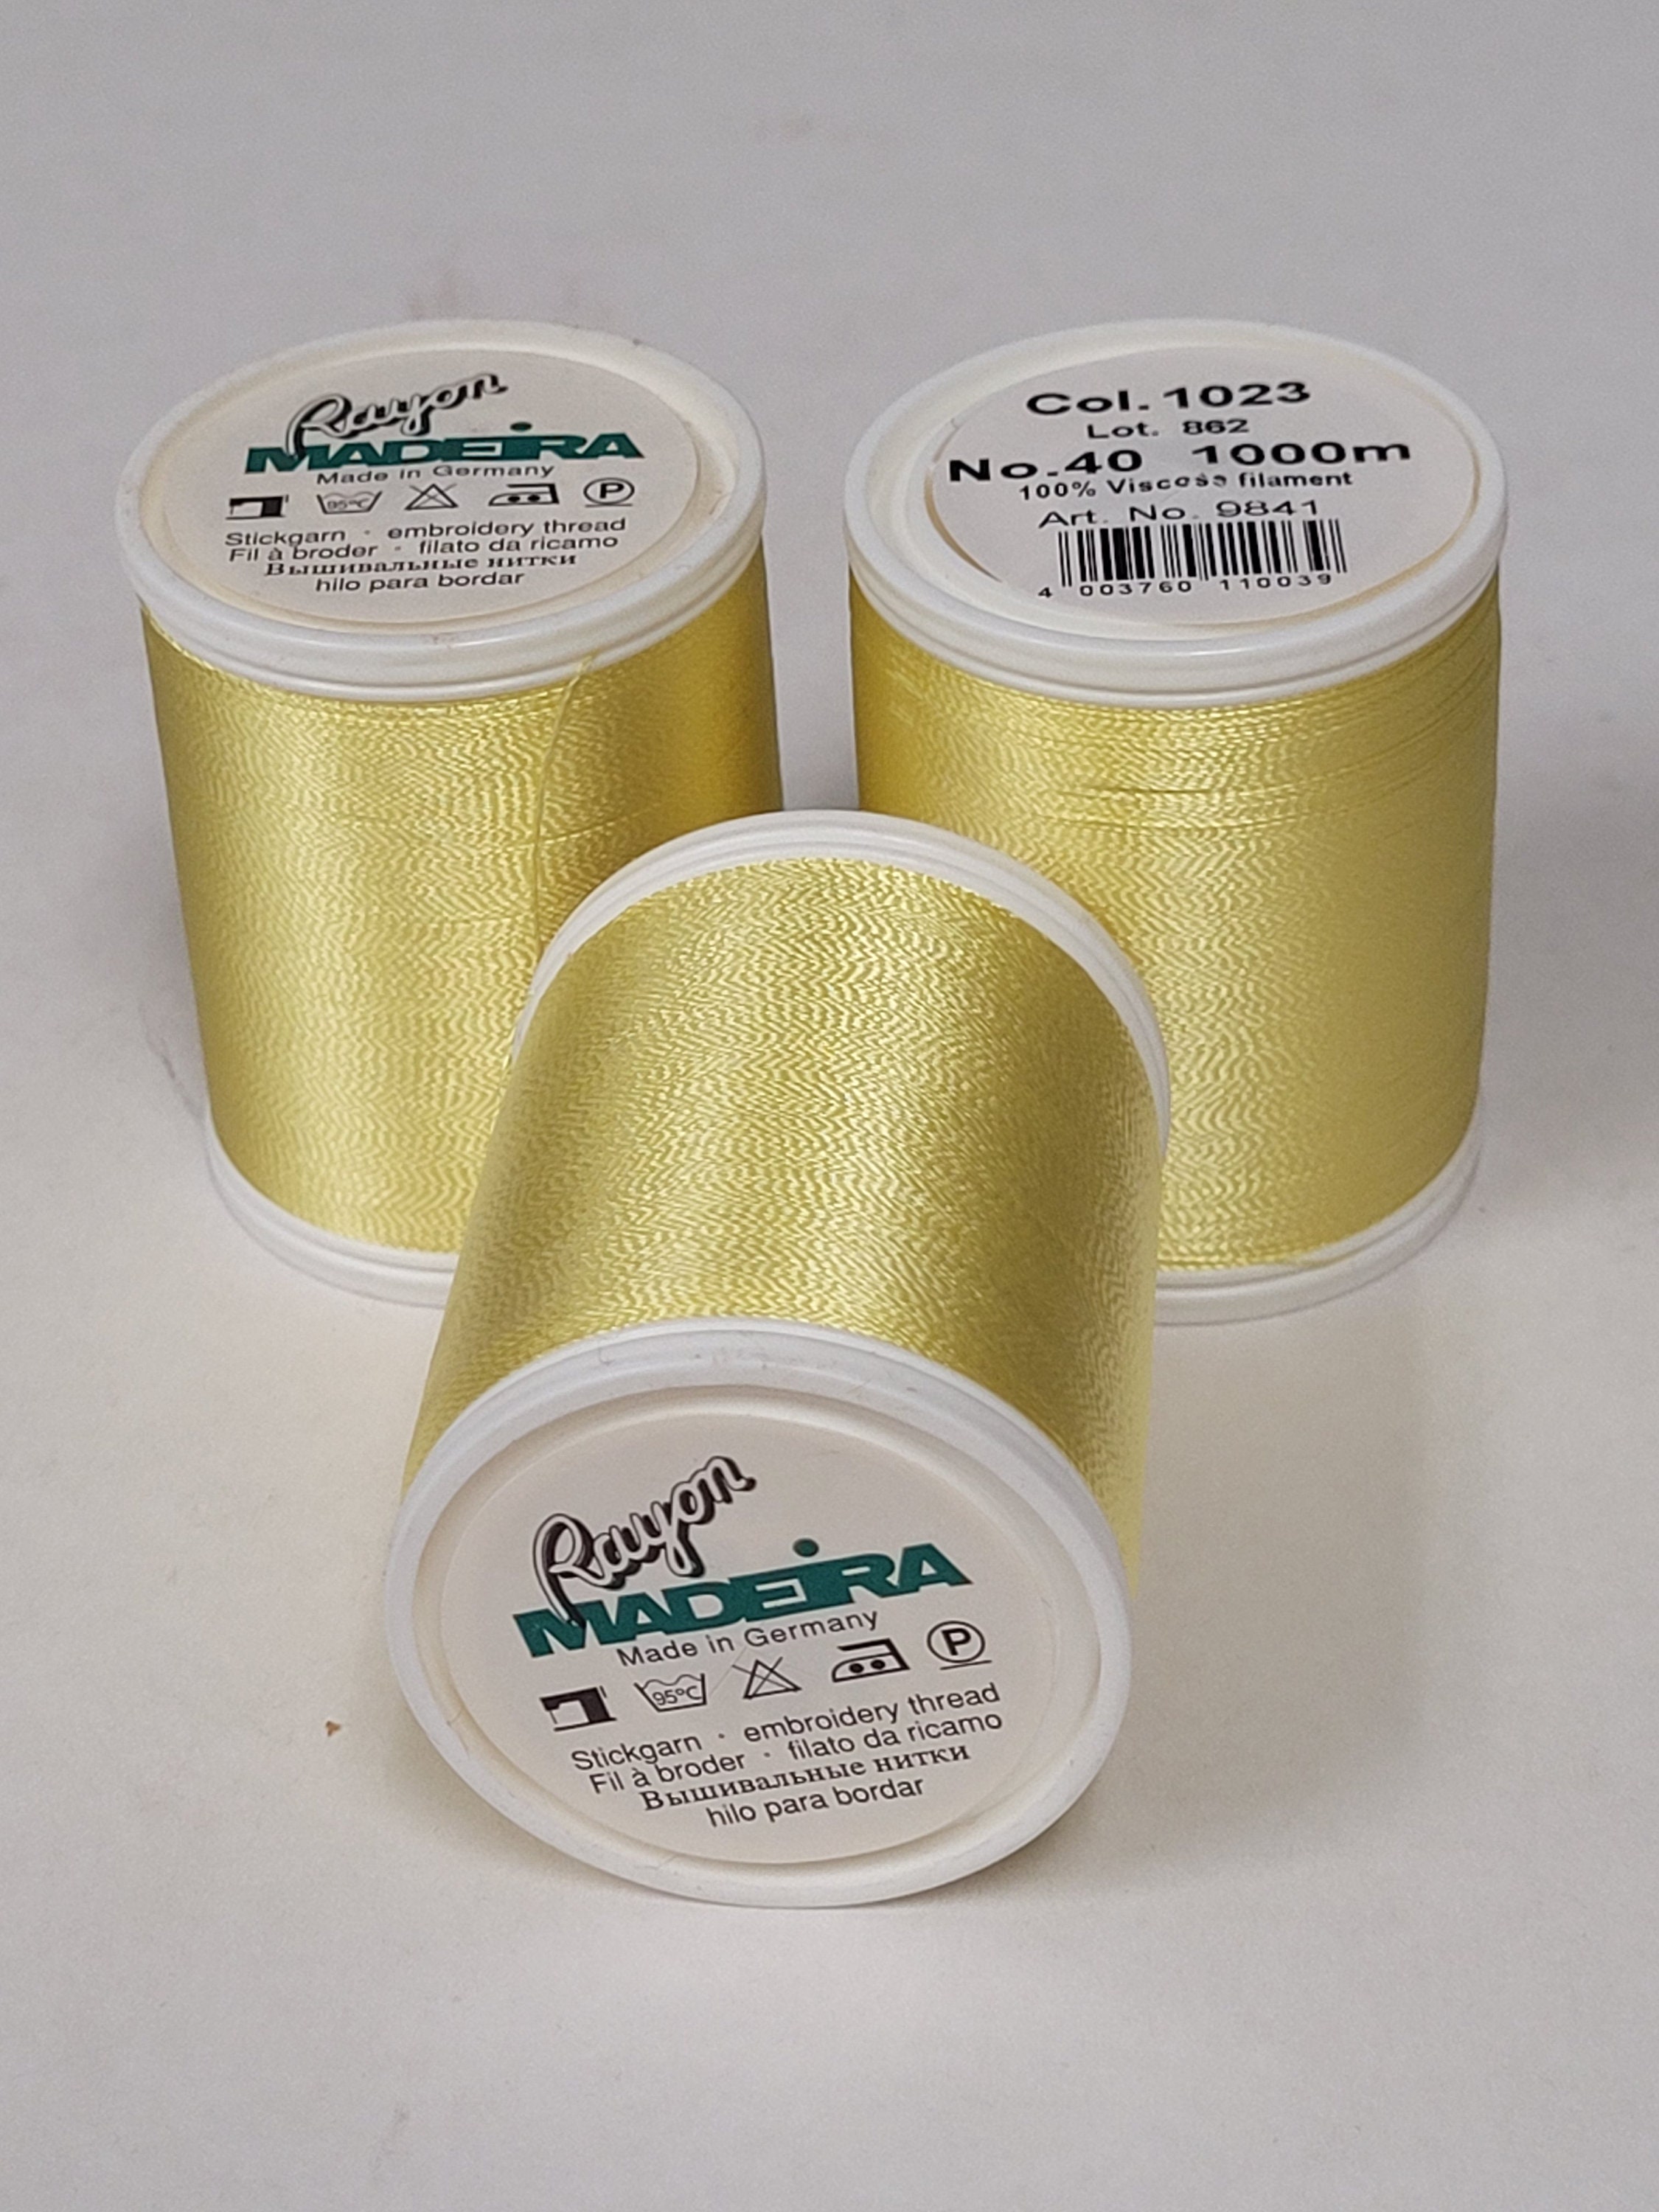 Madeira Embroidery Thread Spools Rayon Lot of 2 No. 40 5000m ~ Made in  Germany